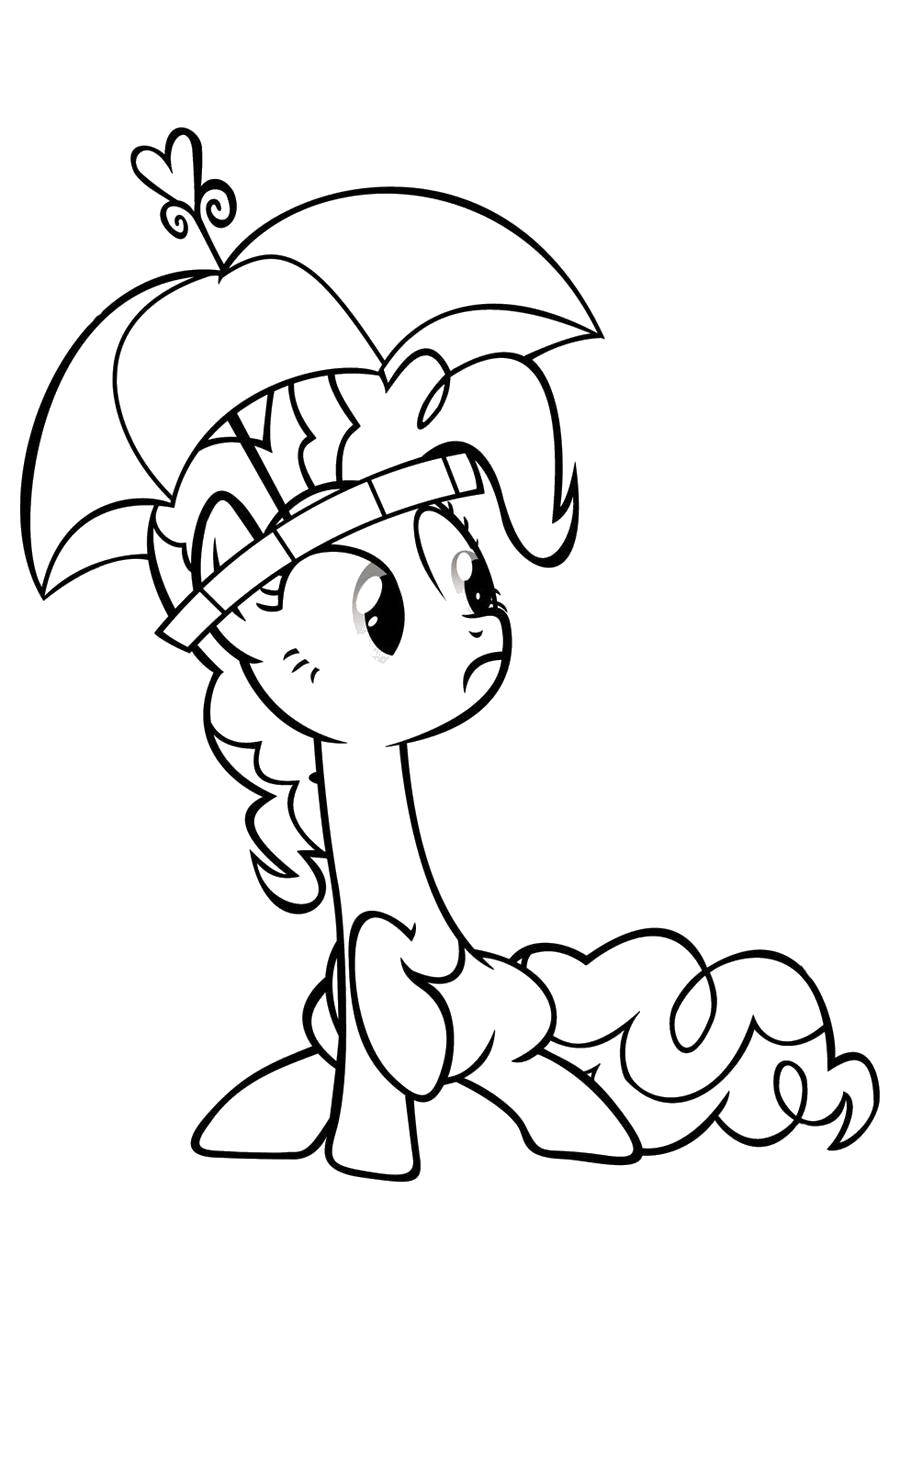 Coloring Surprised ponies from my little pony. Category Ponies. Tags:  Pony, My little pony.